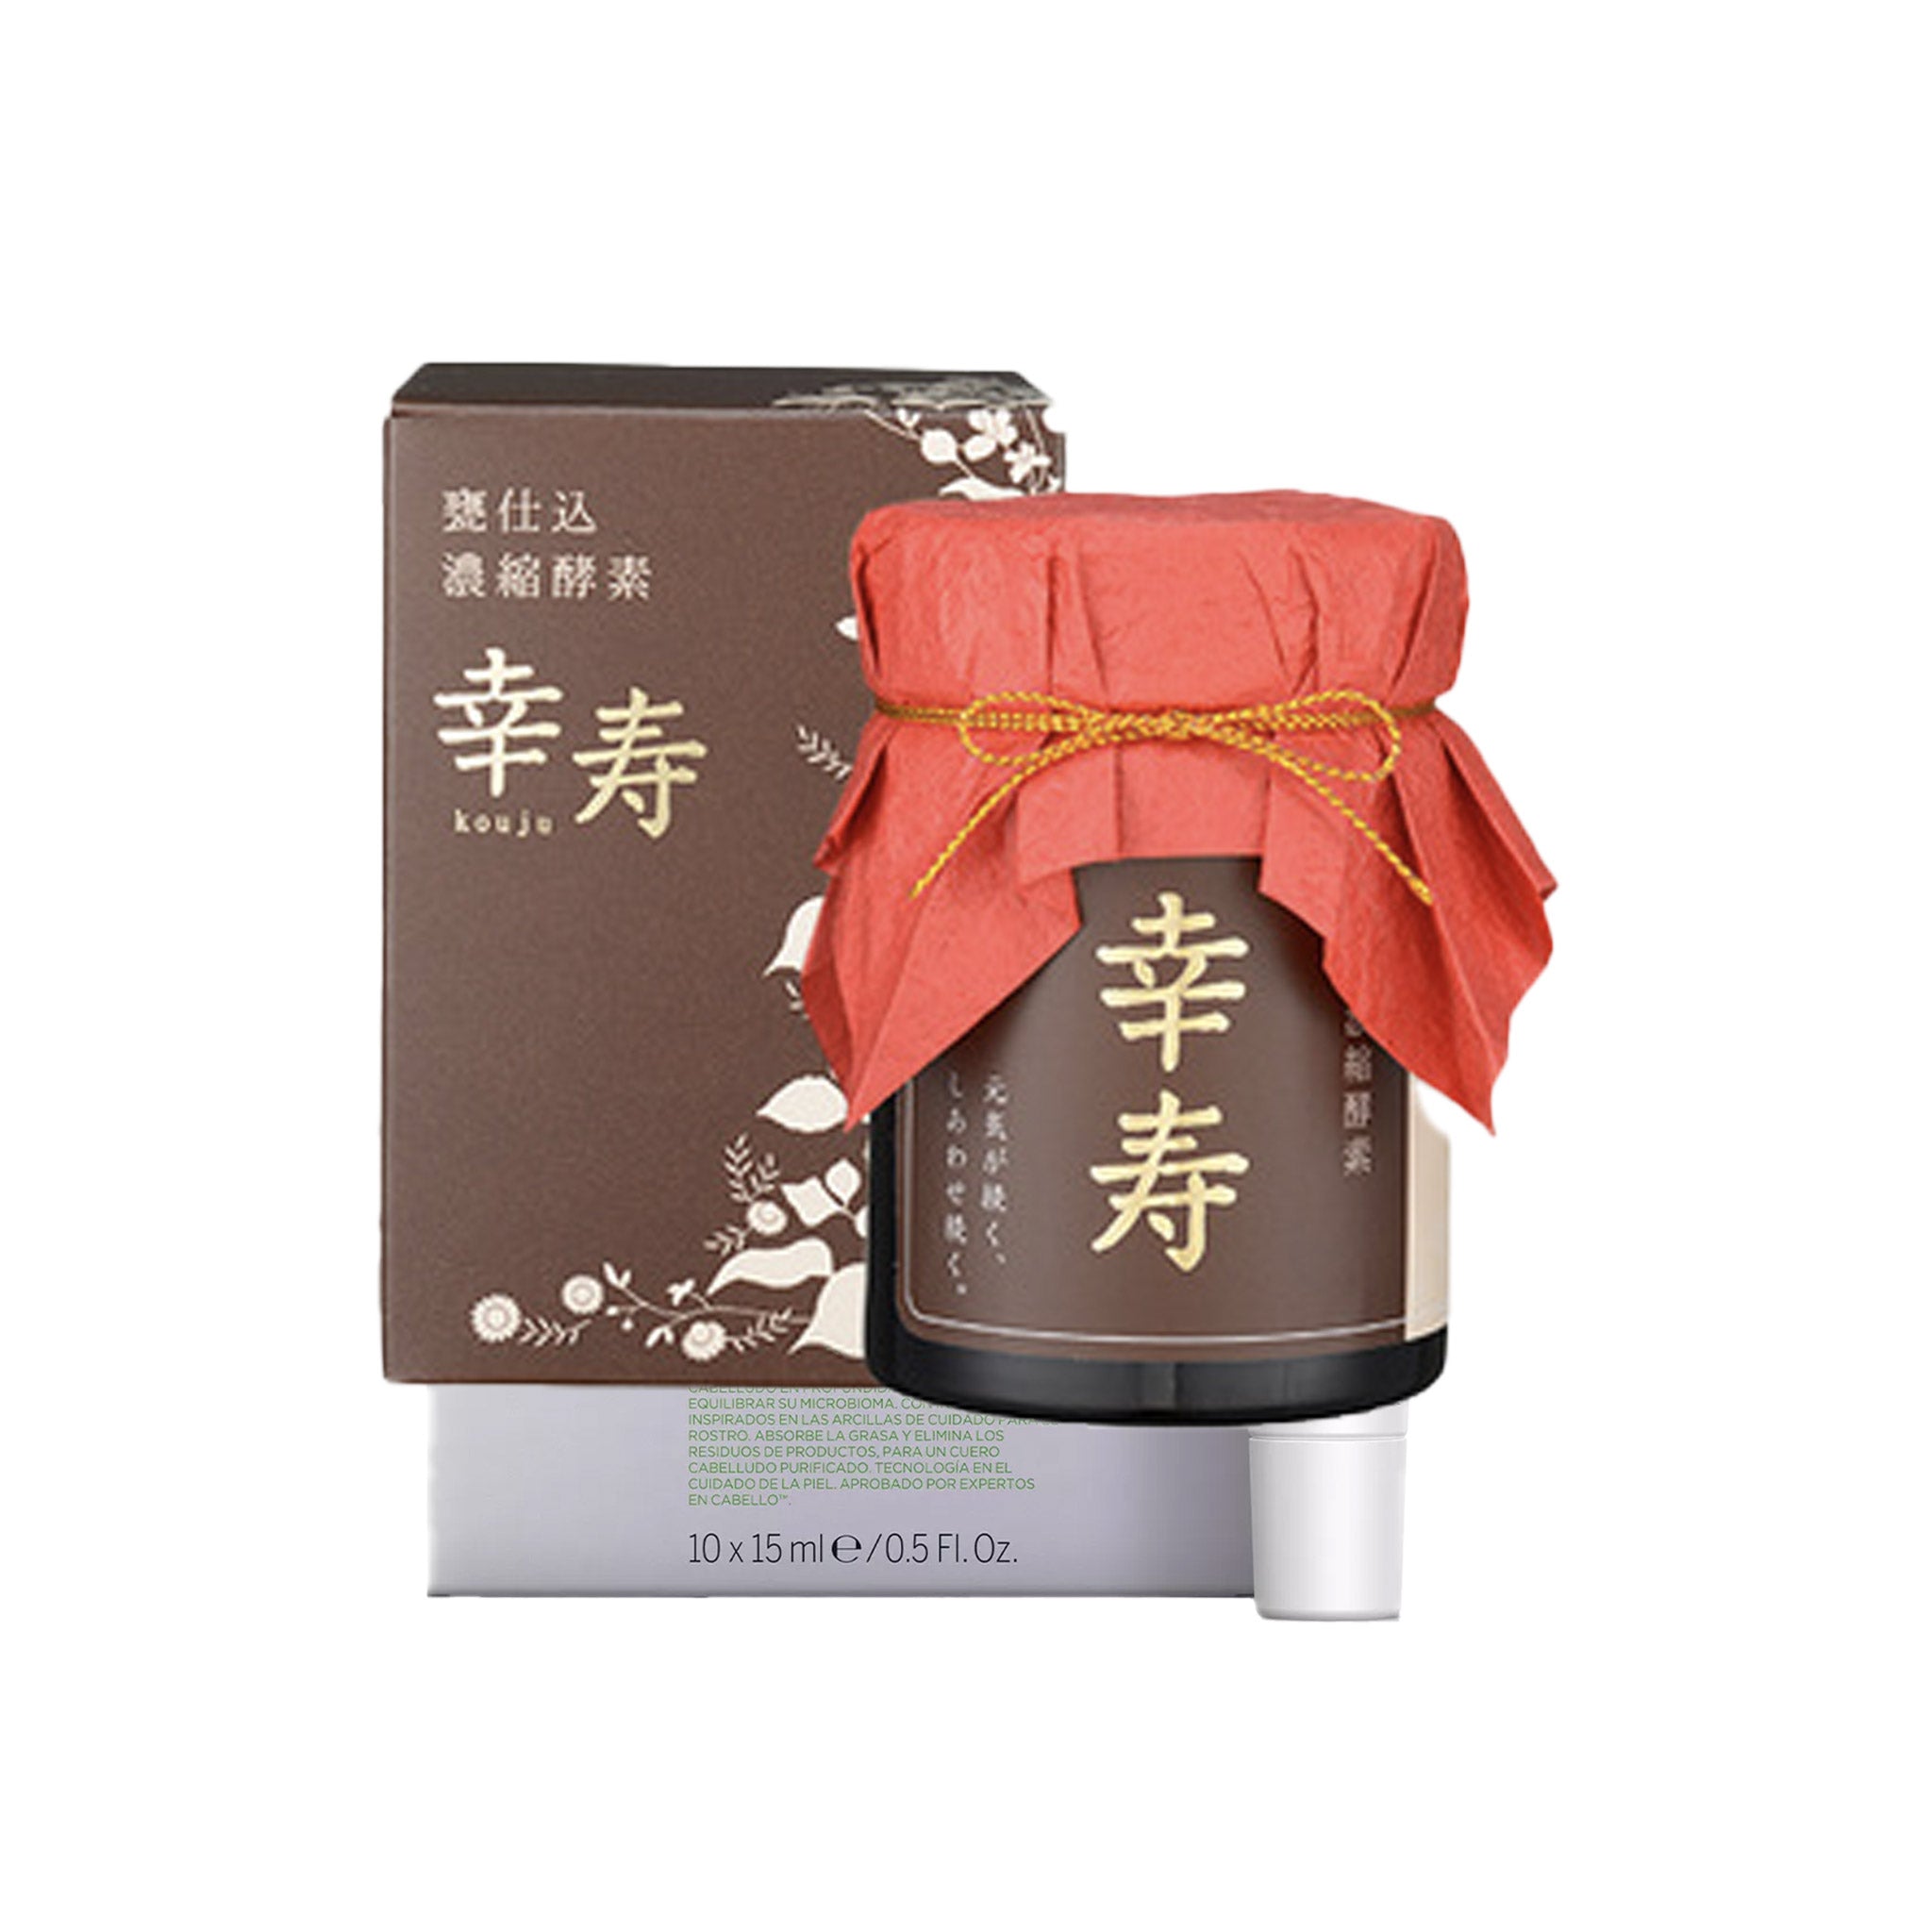 Kouju Concentrated Pure Enzyme